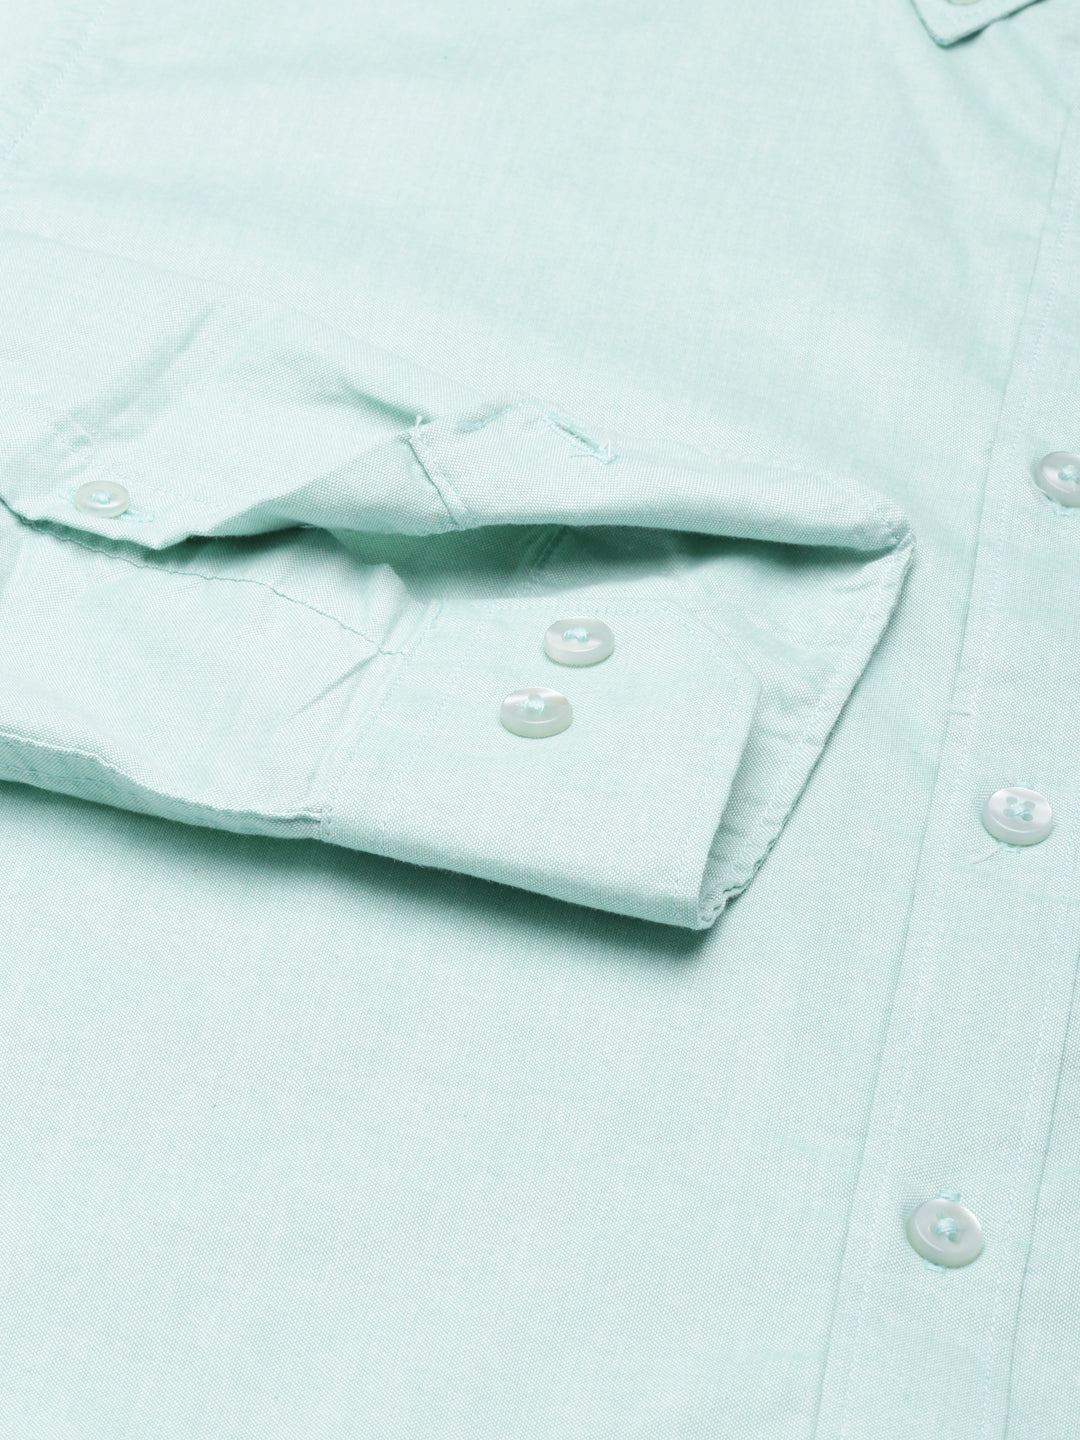 Pale Turquoise Button Down Solid Shirt Solid Shirt Bushirt   